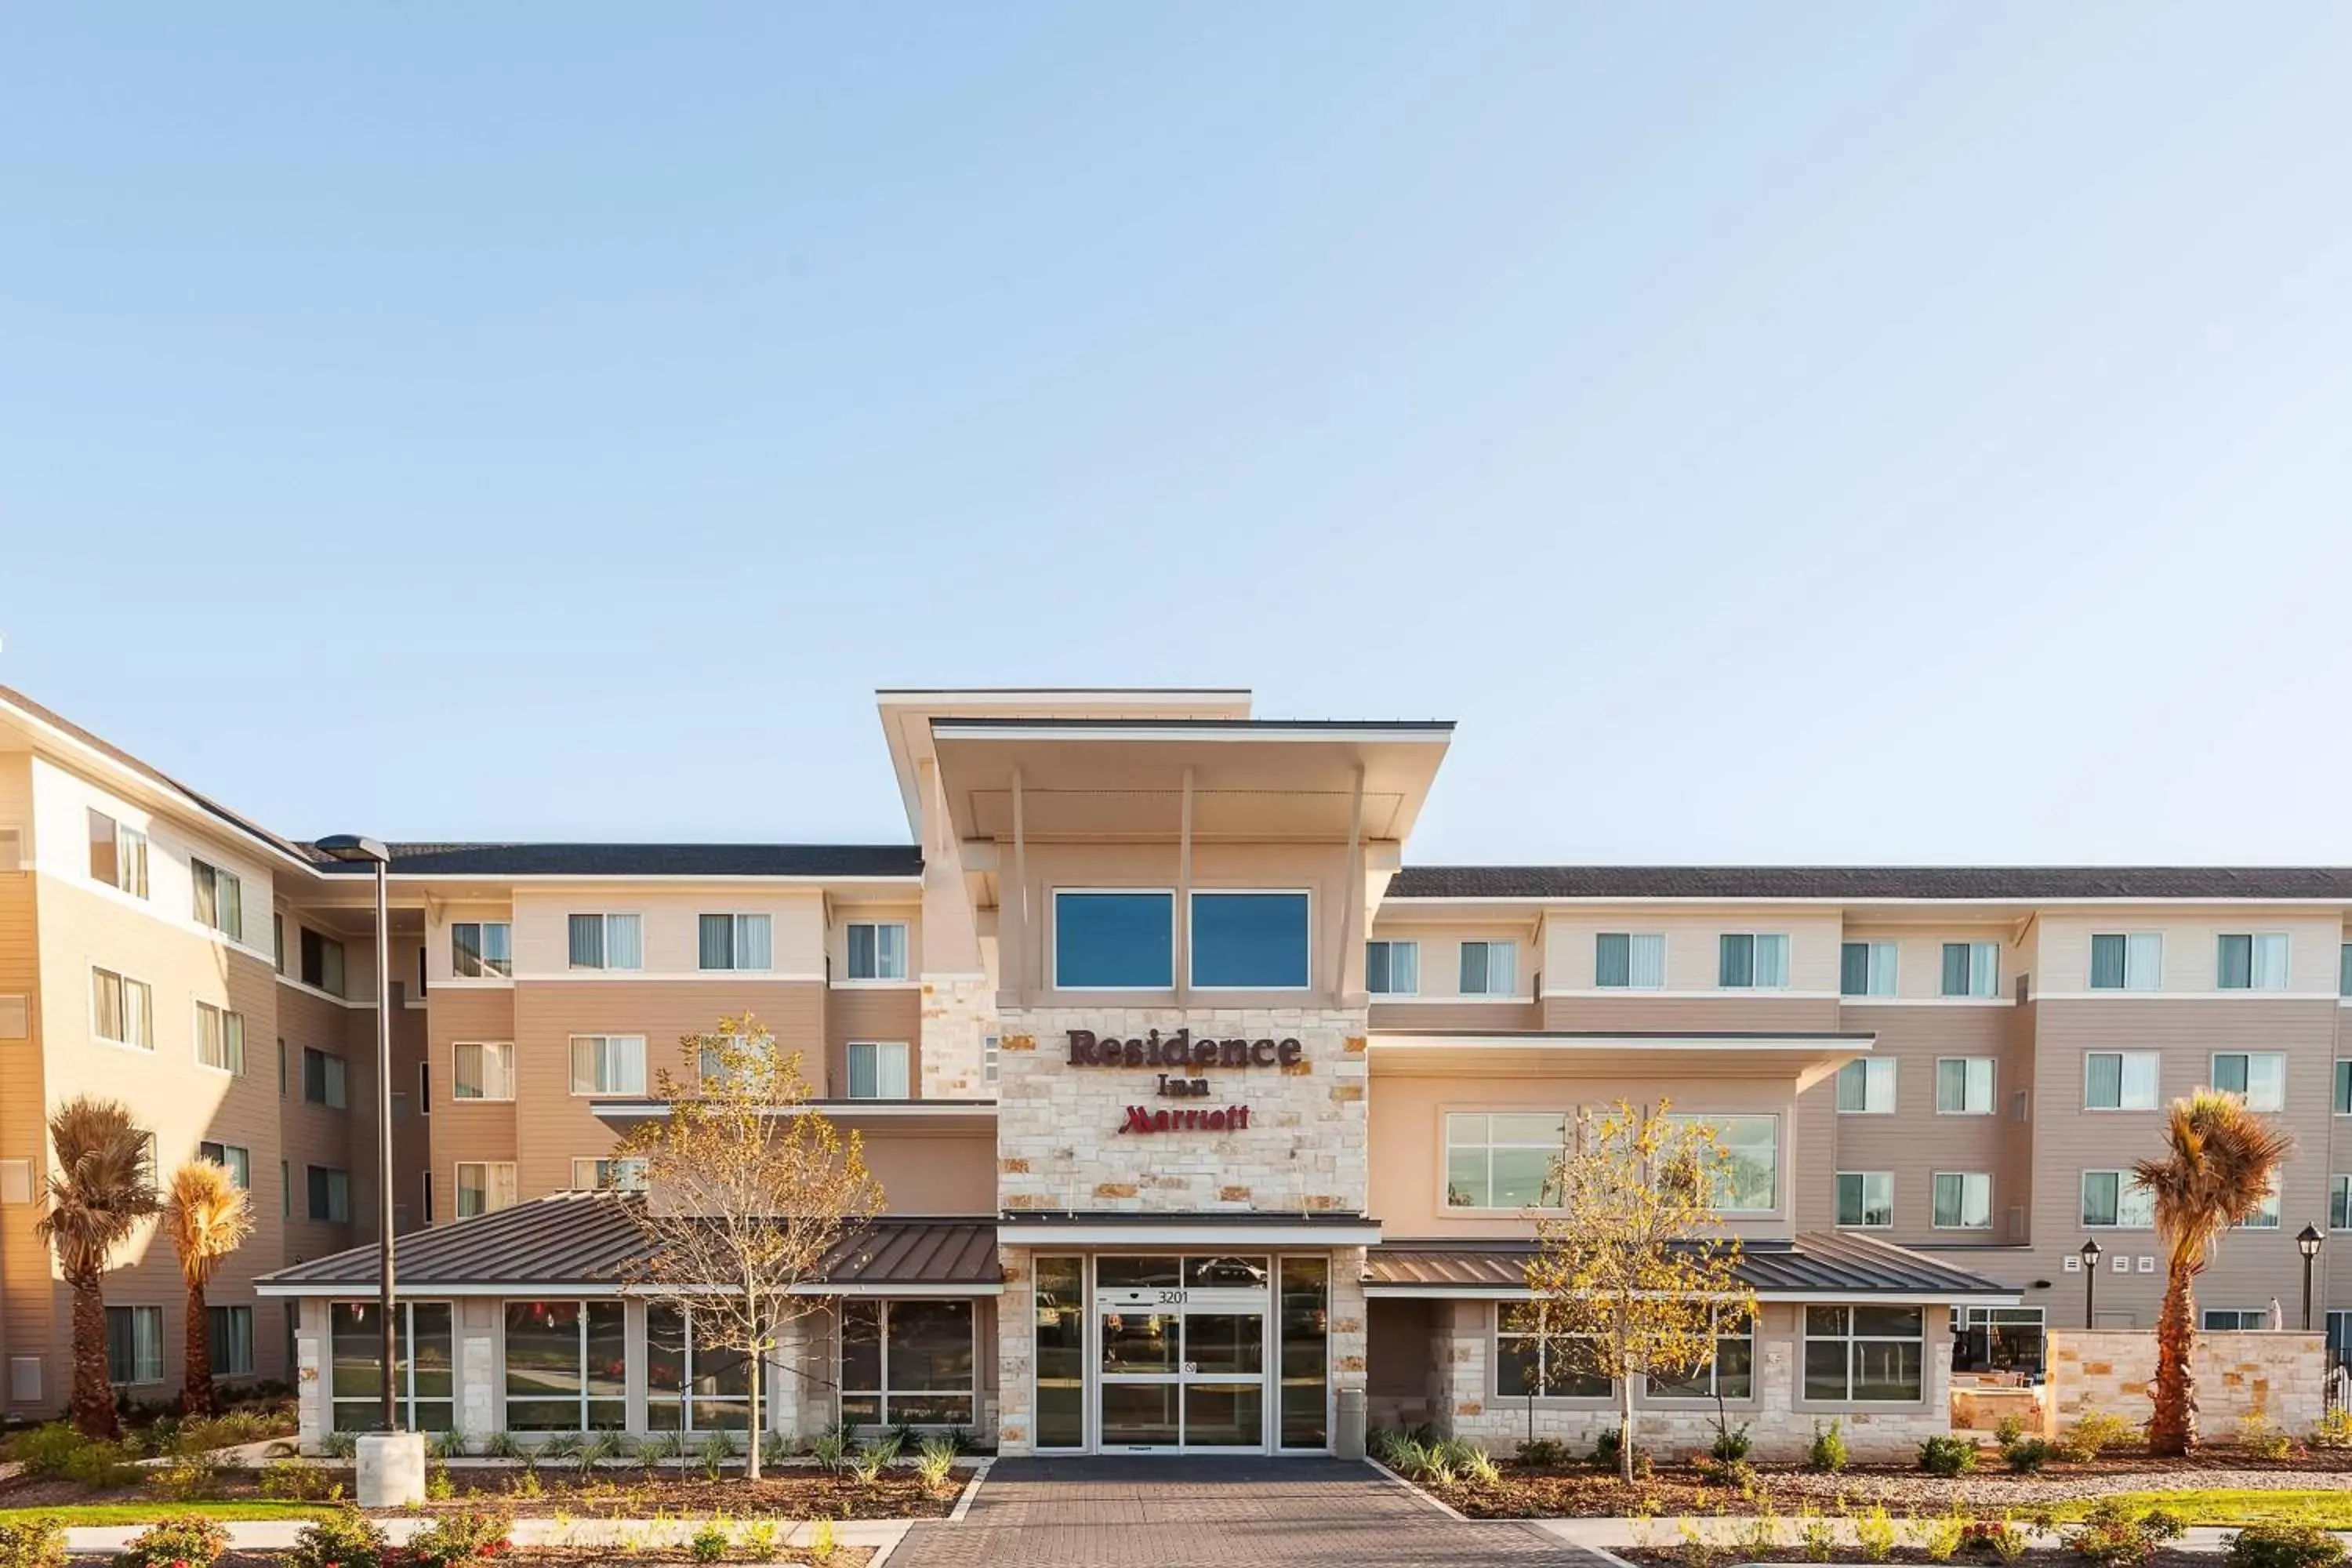 Property Building in Residence Inn by Marriott Austin Airport